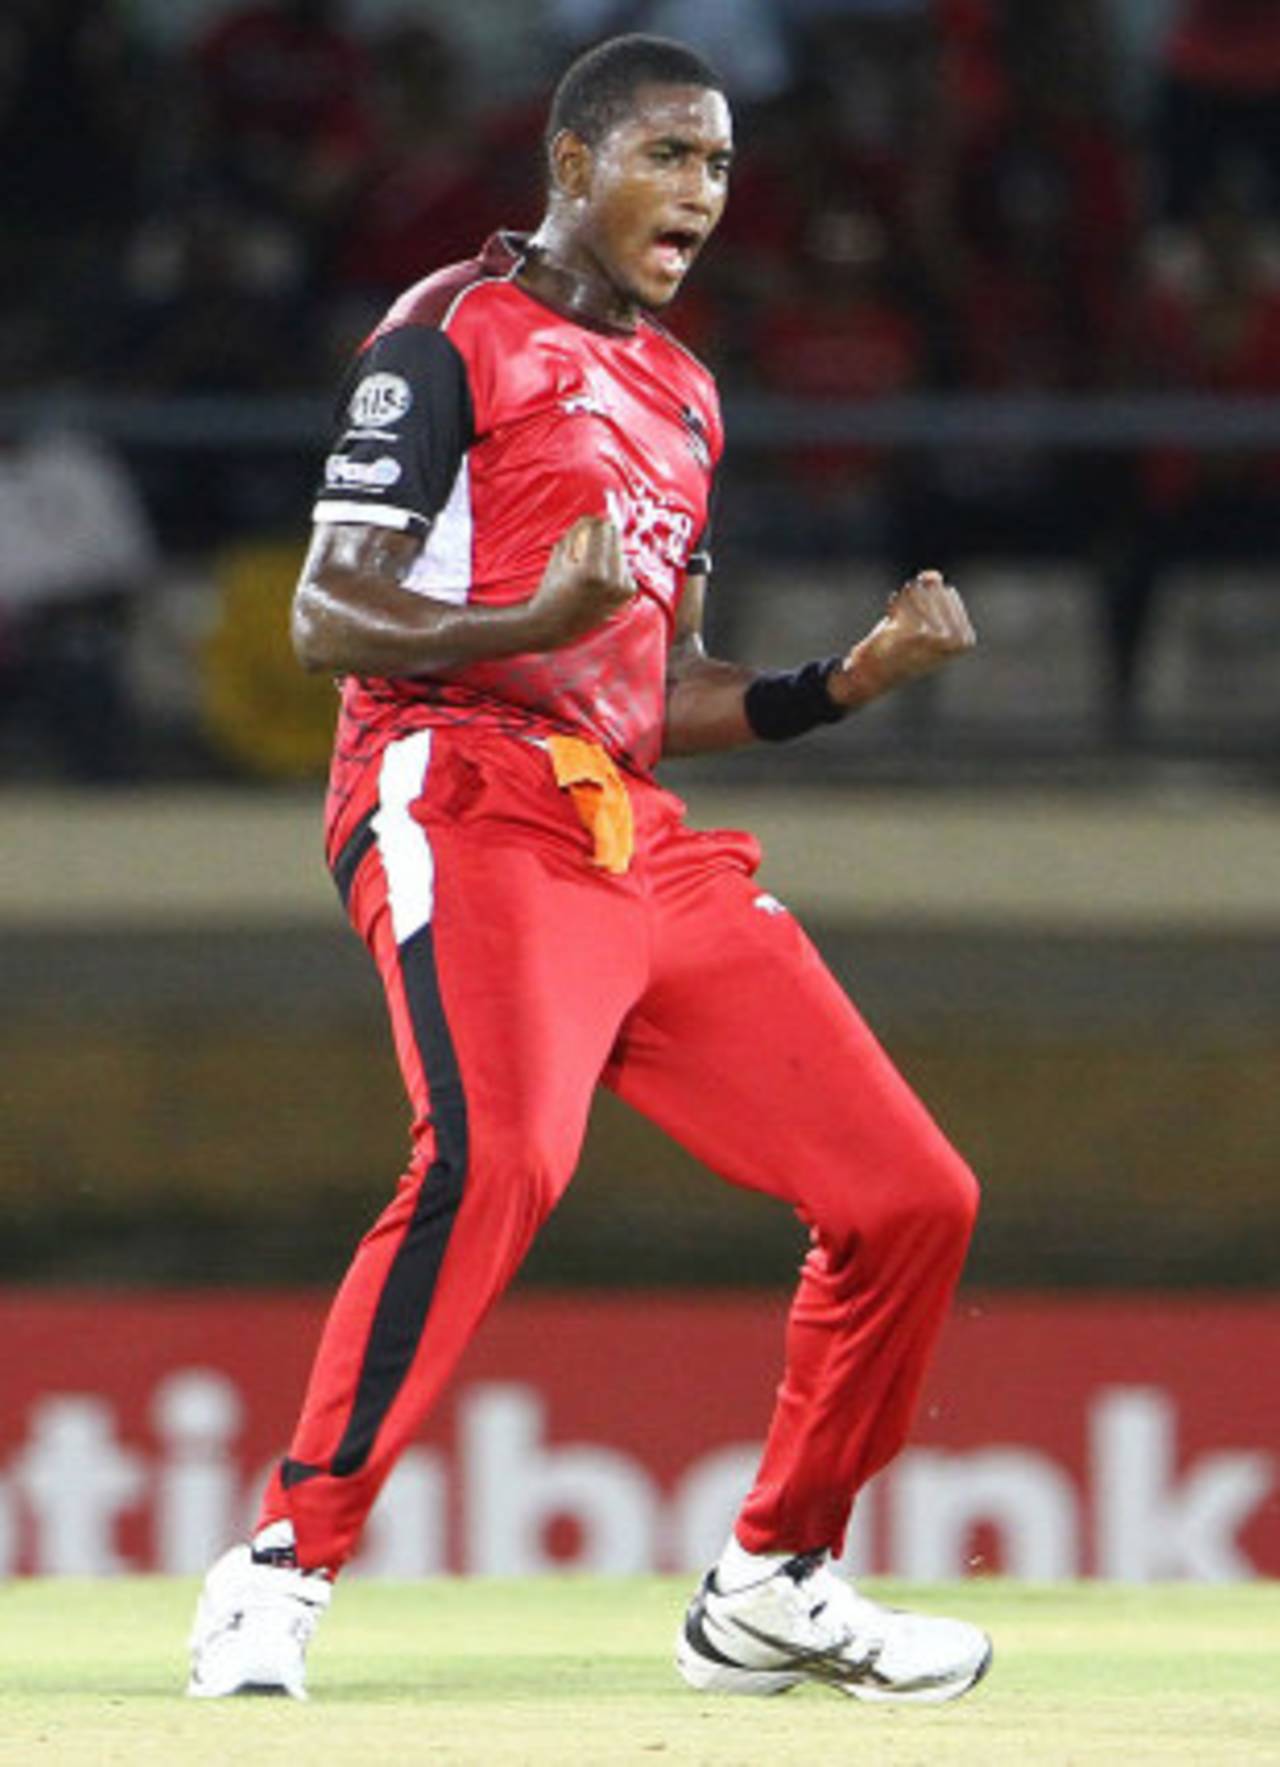 Delorn Johnson defended 19 off the last over to give Trinidad & Tobago their second win of the CPL&nbsp;&nbsp;&bull;&nbsp;&nbsp;Getty Images